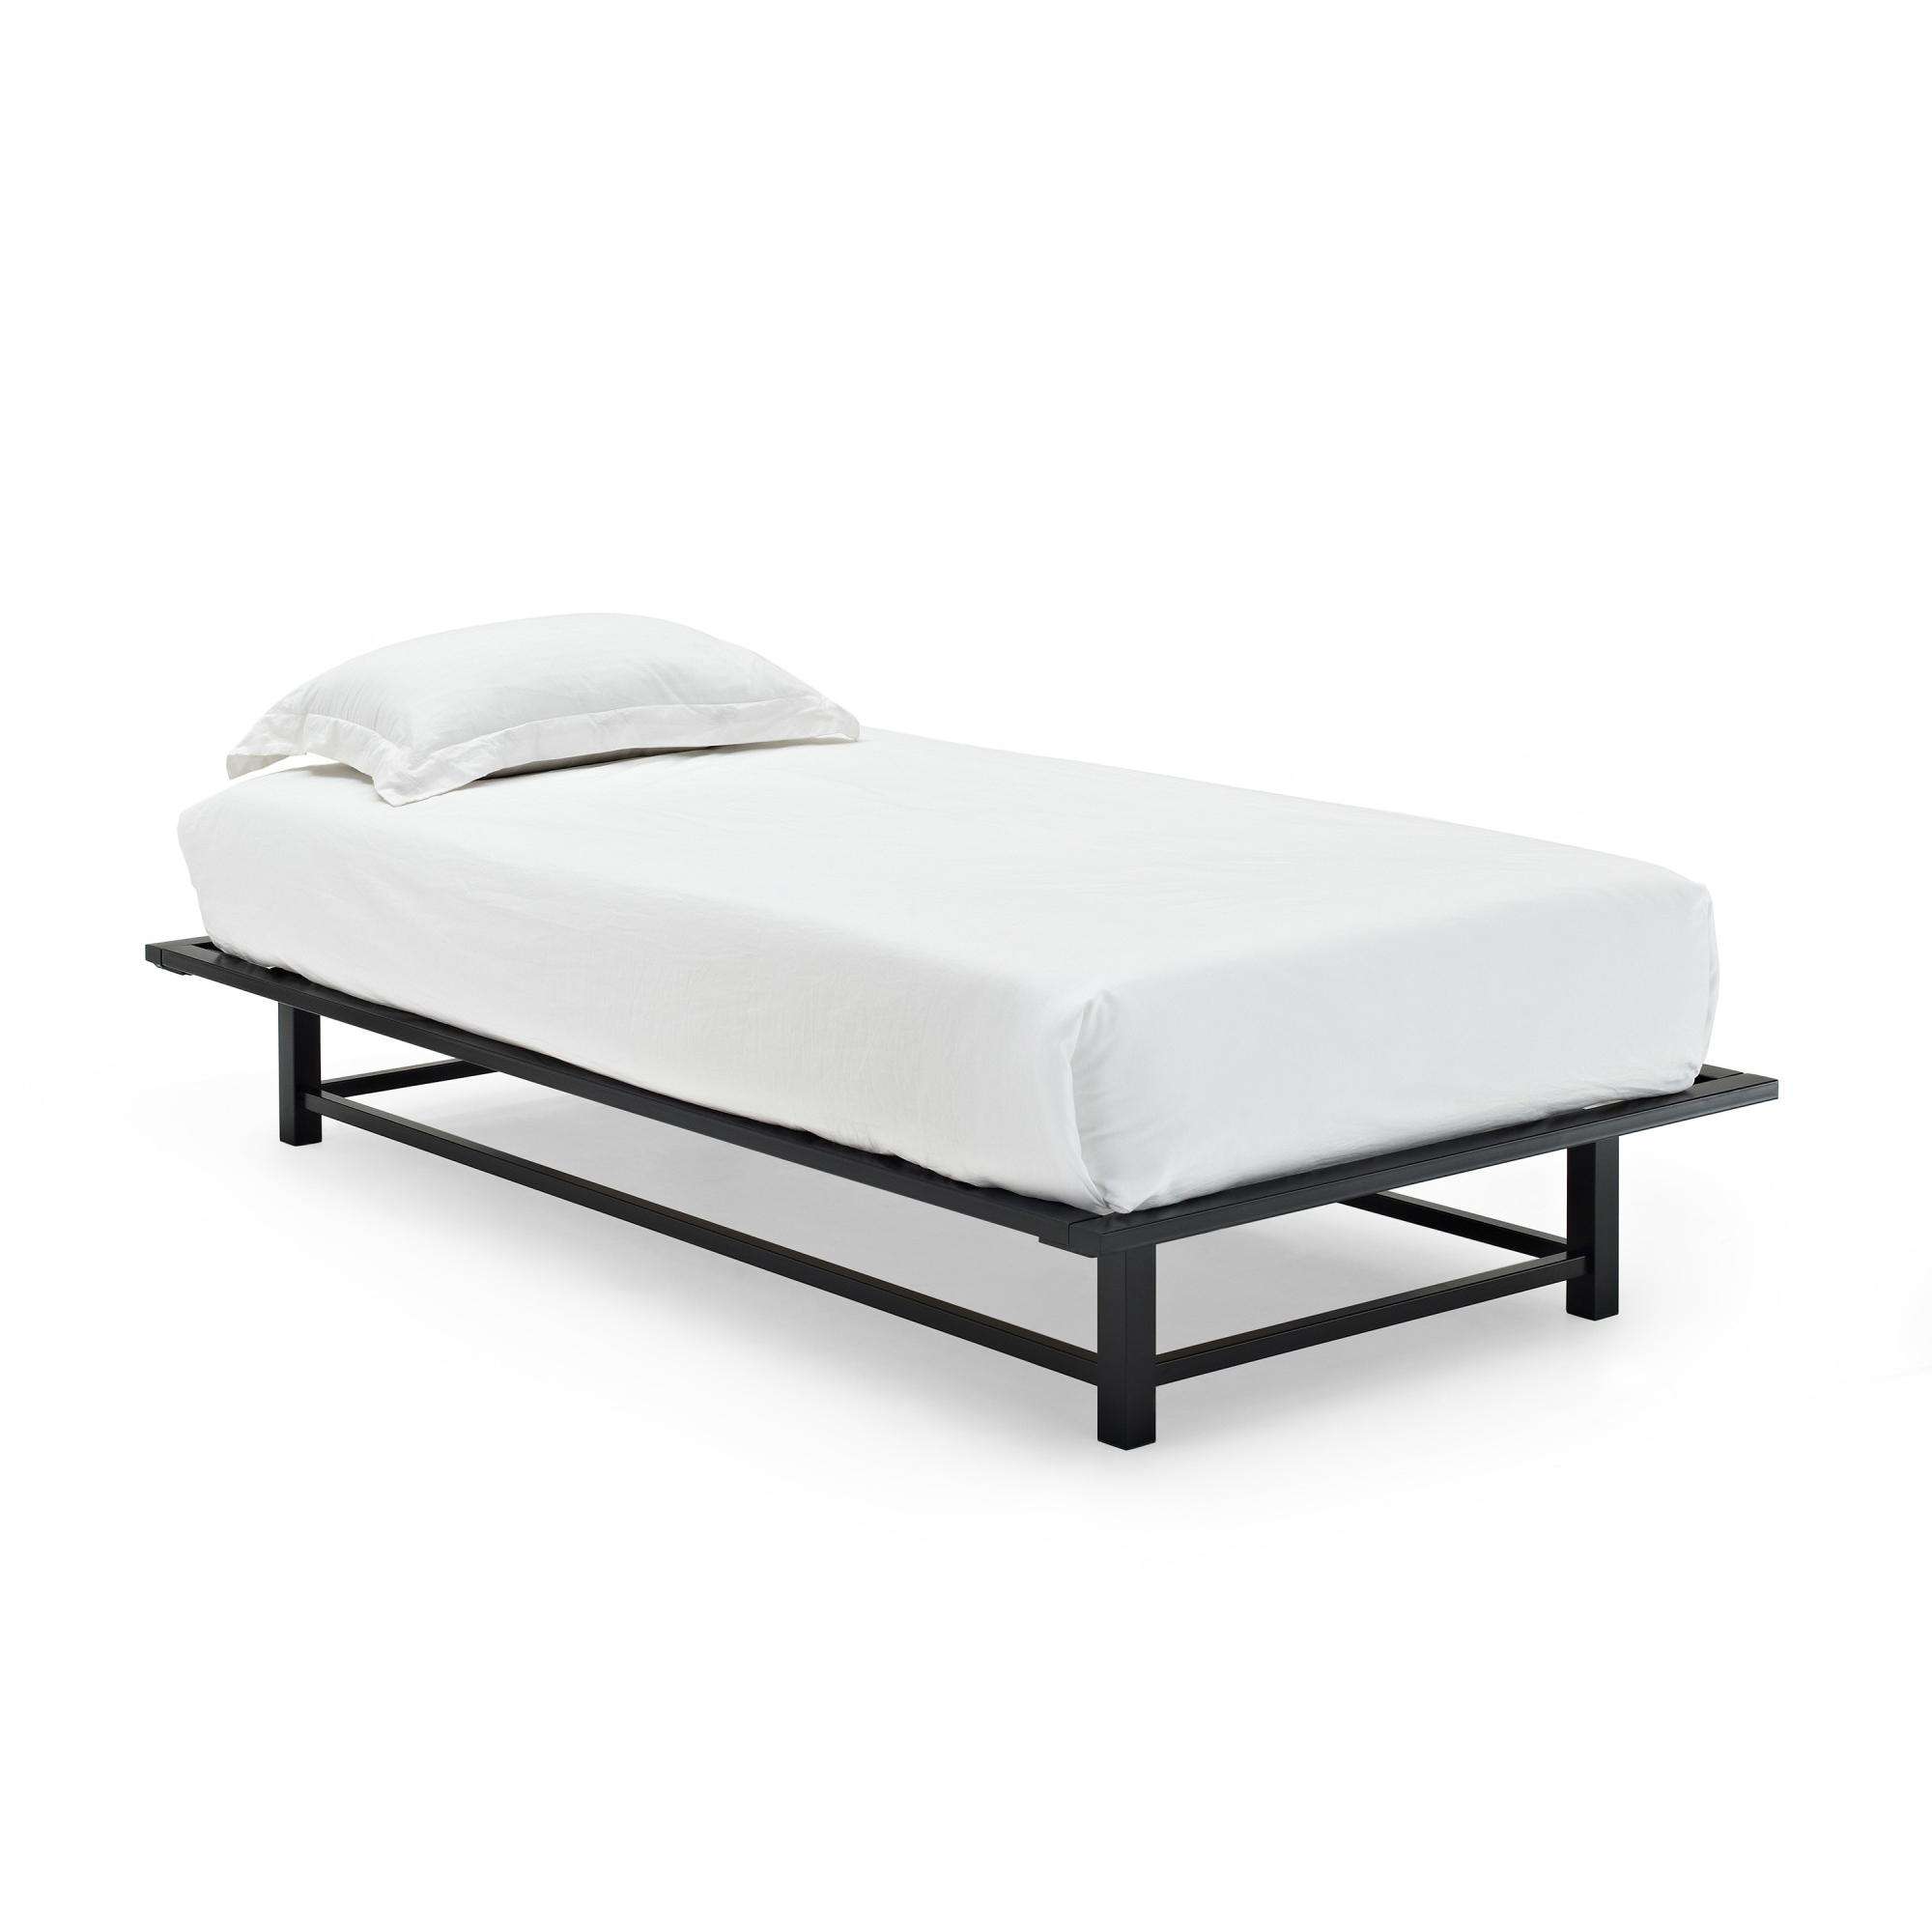 DHI Parsons Metal Ledge Platform Bed, Multiple Colors and Sizes - image 1 of 4